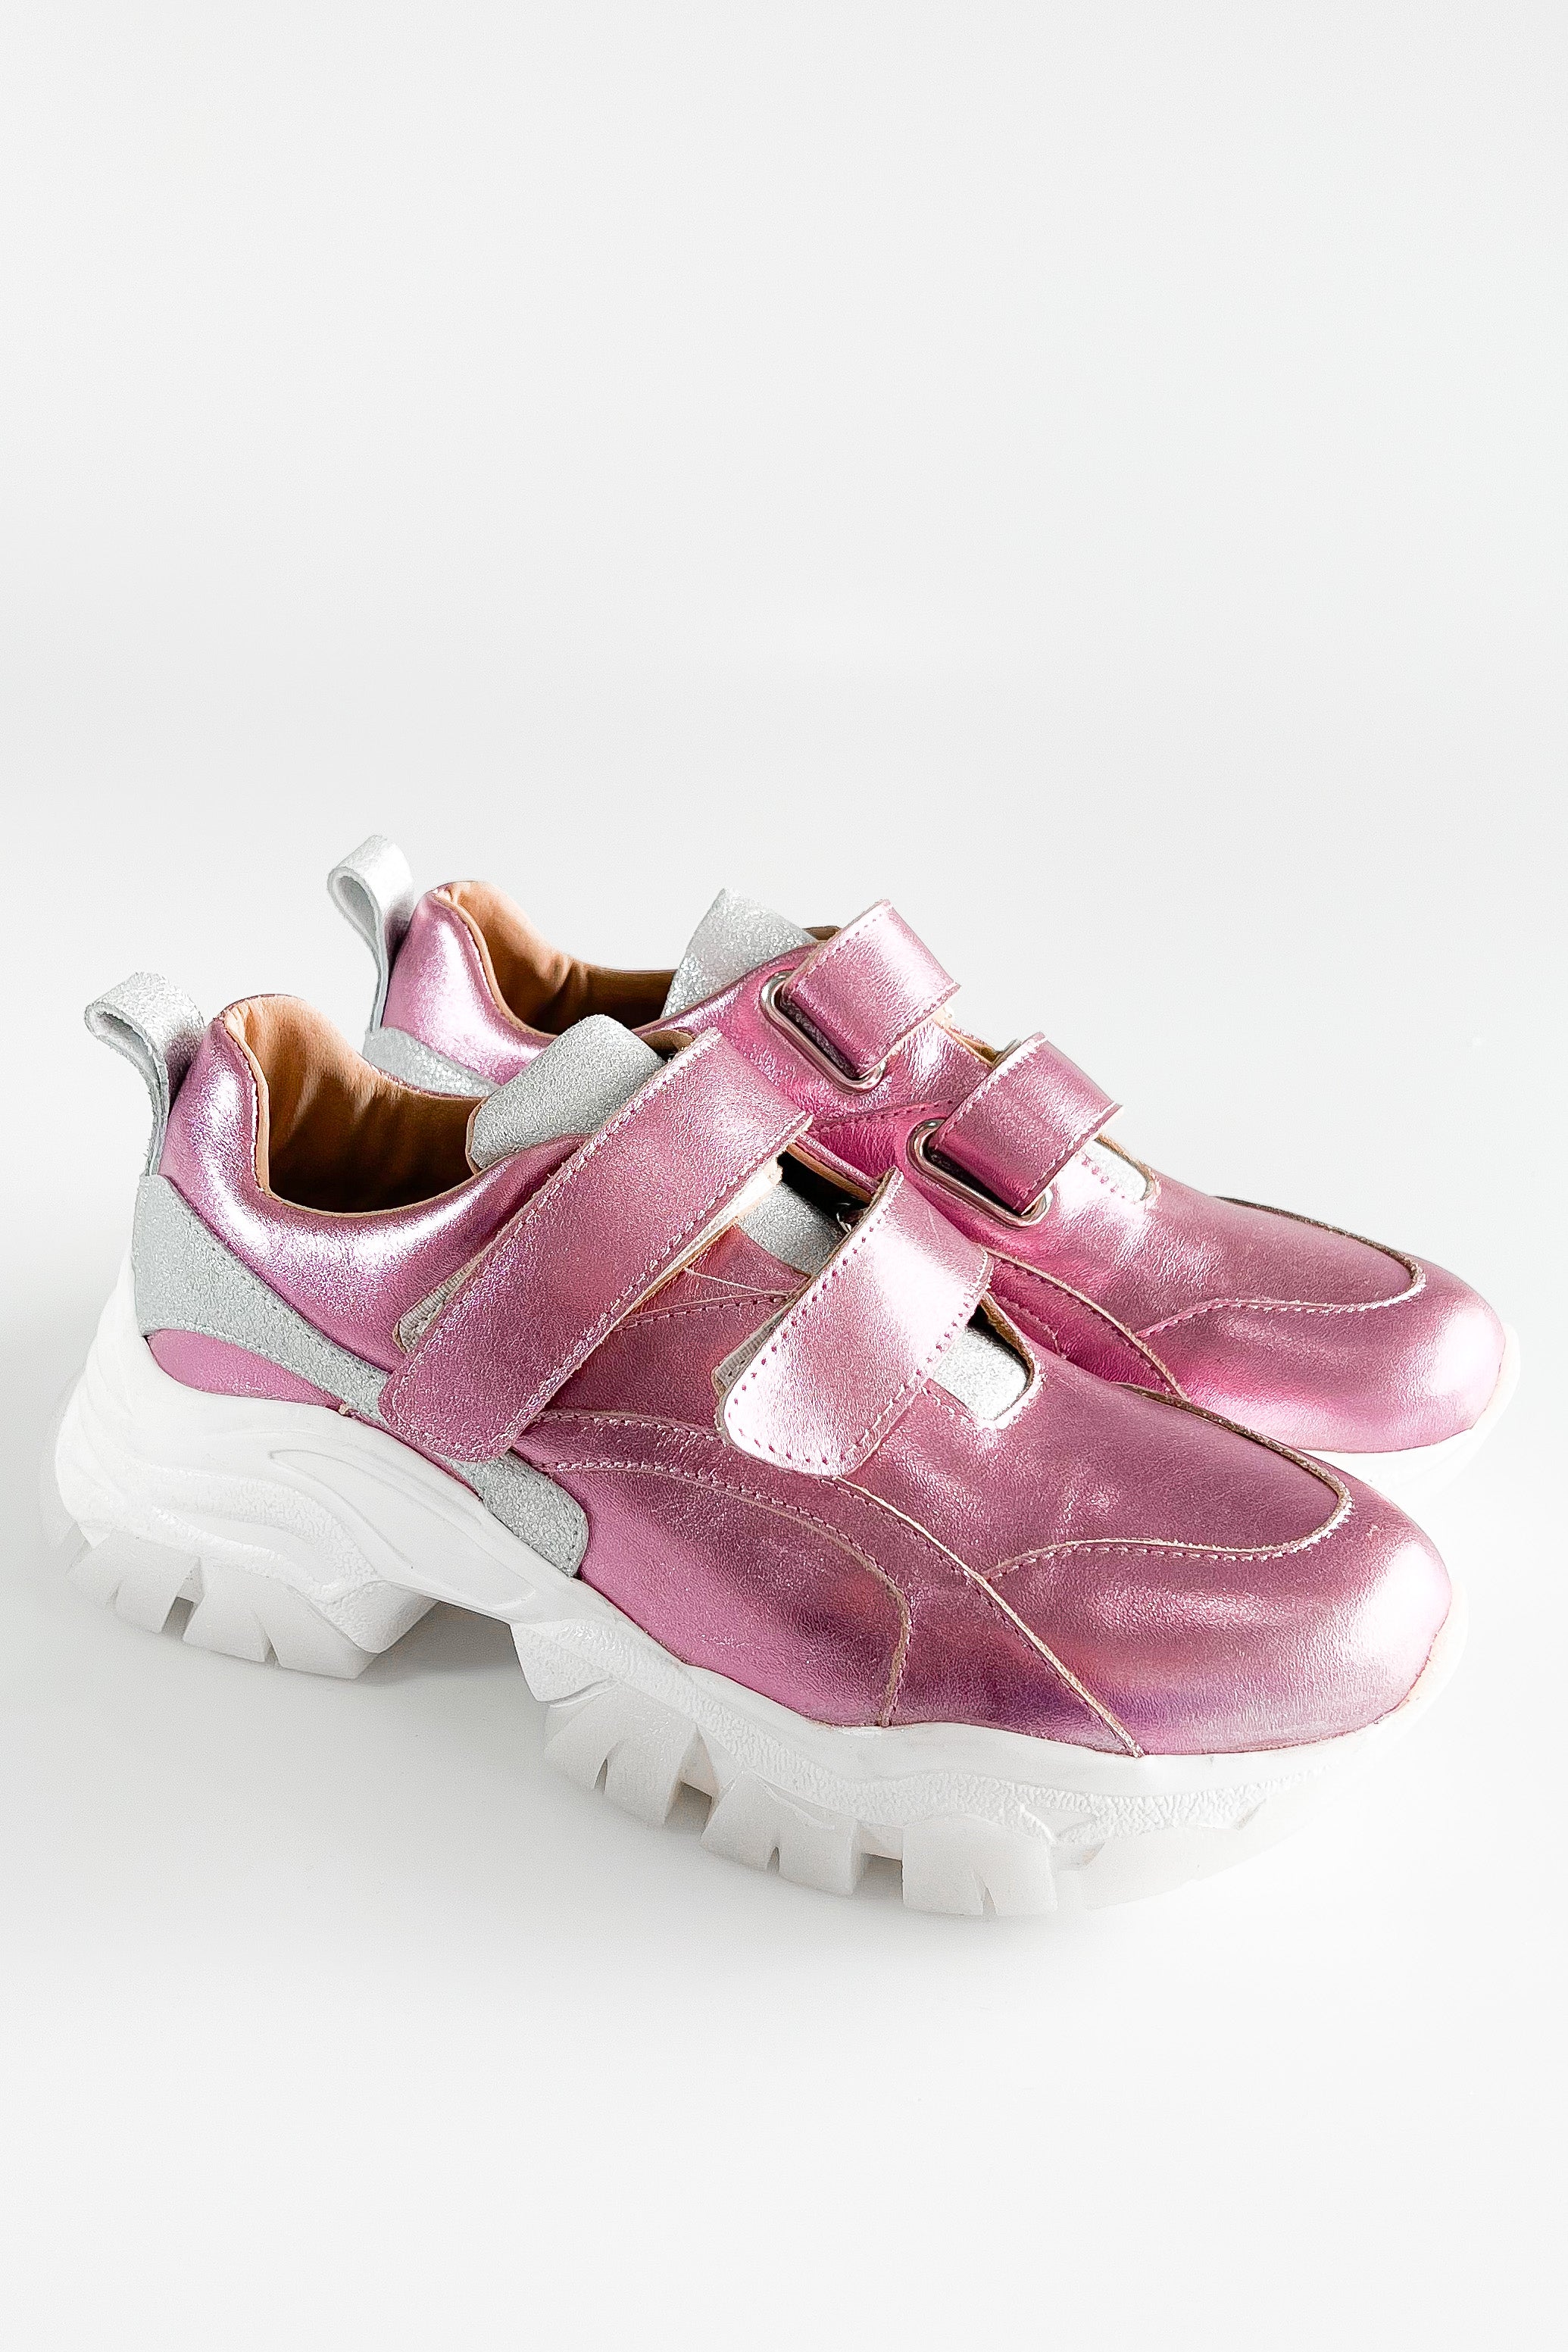 Genuine Leather CB Exclusive Velcro Sneakers - Metal Pink/Silver-250 Shoes-PMK Shoes-Coastal Bloom Boutique, find the trendiest versions of the popular styles and looks Located in Indialantic, FL